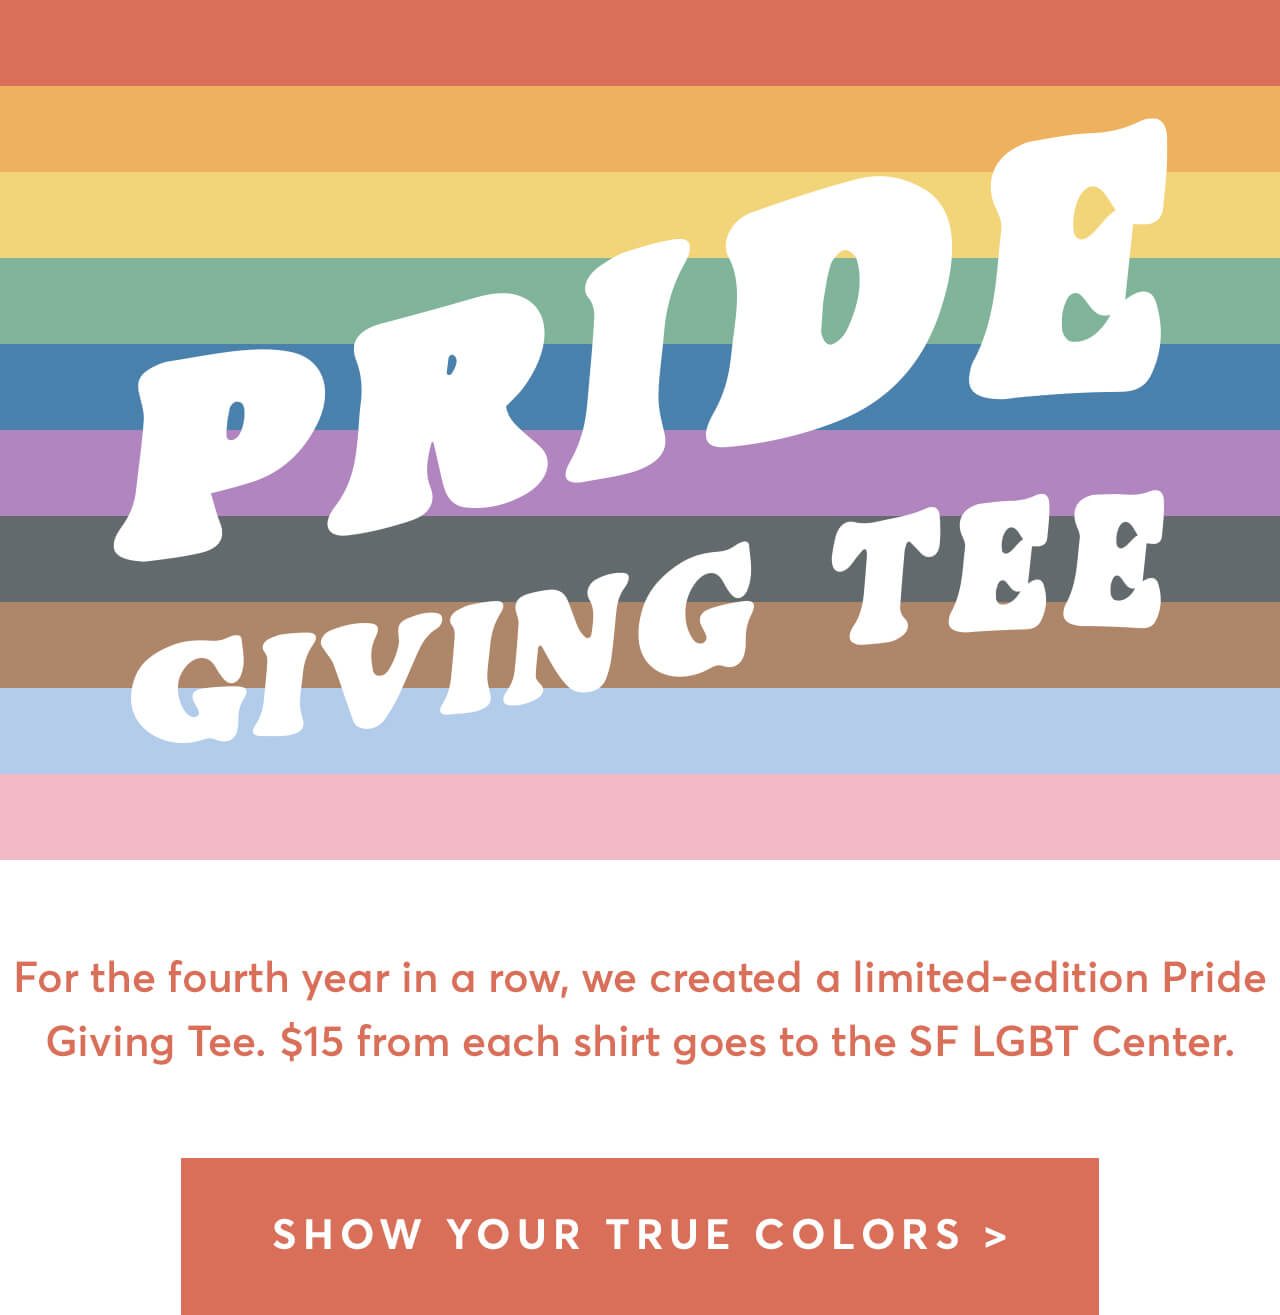 Show your true colors and support a great cause